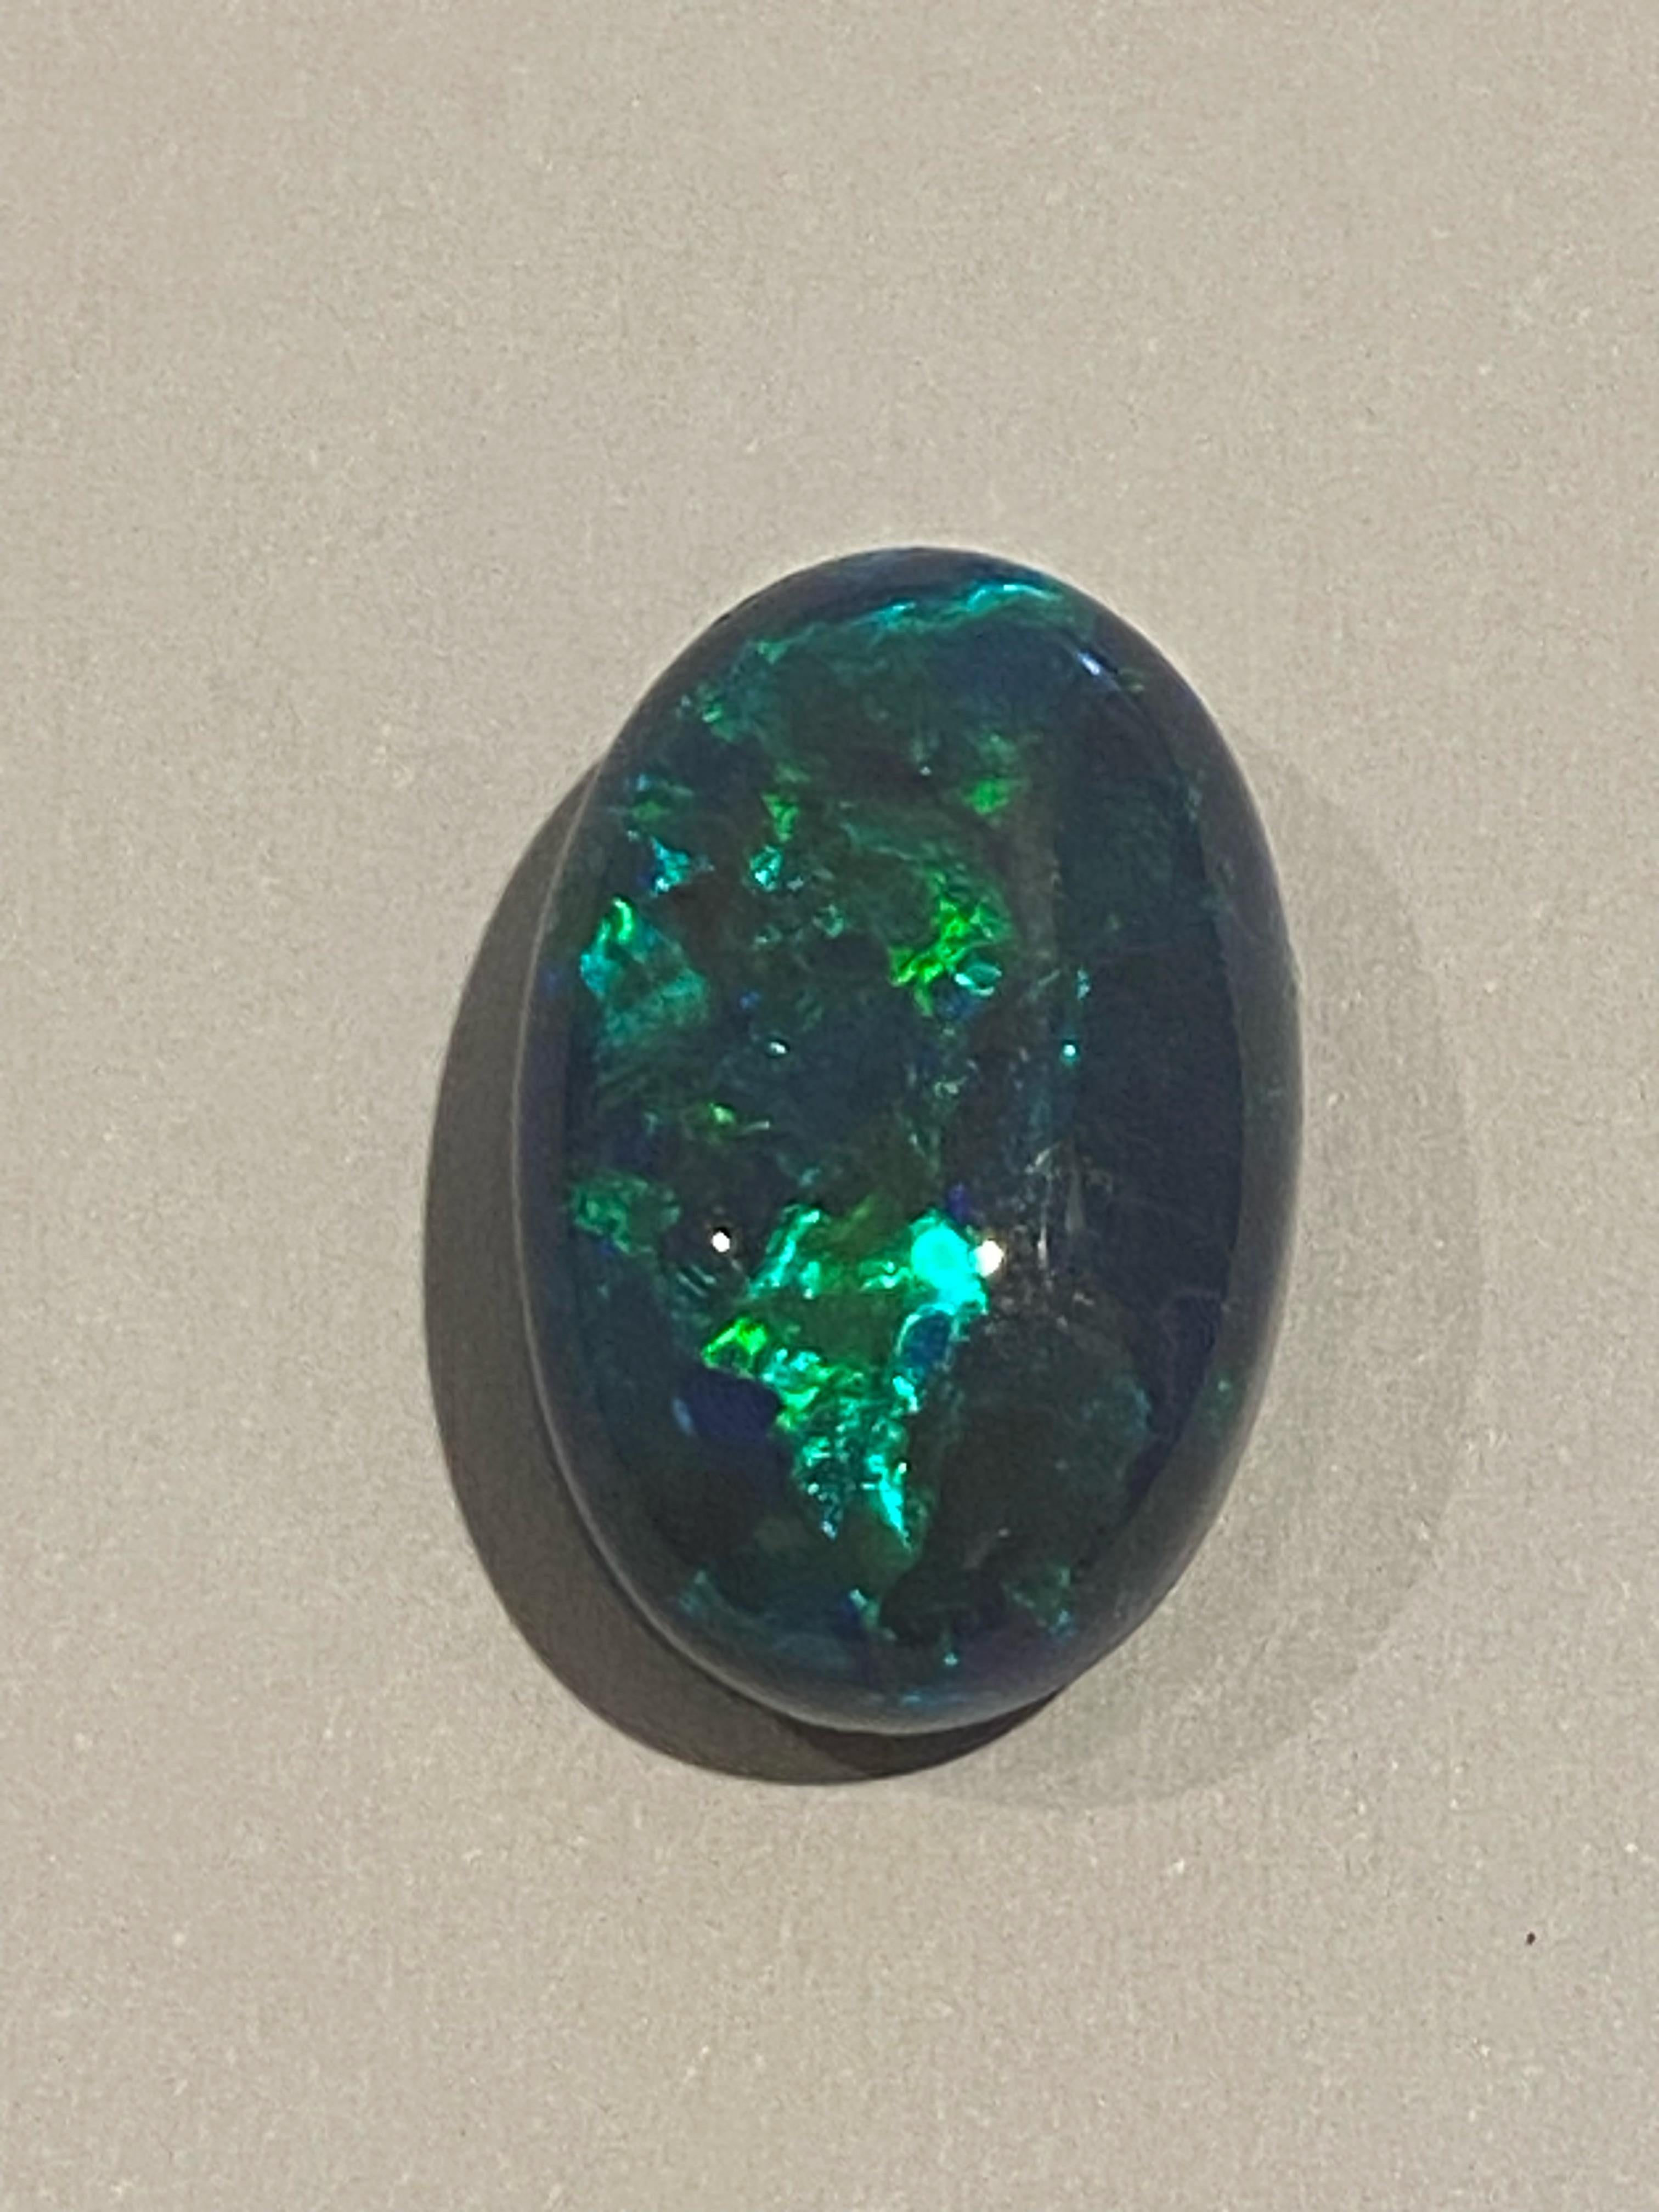 This magnificent Australian Black Opal is 
from Lightning Ridge, NSW 

It's of impressive & rarely encountered size:
9.20ct (17.13mm x 11.36mm x 7.41mm)

It's Natural, of type 1, 
meaning that it hasn't been treated or enhanced &
that it's solid